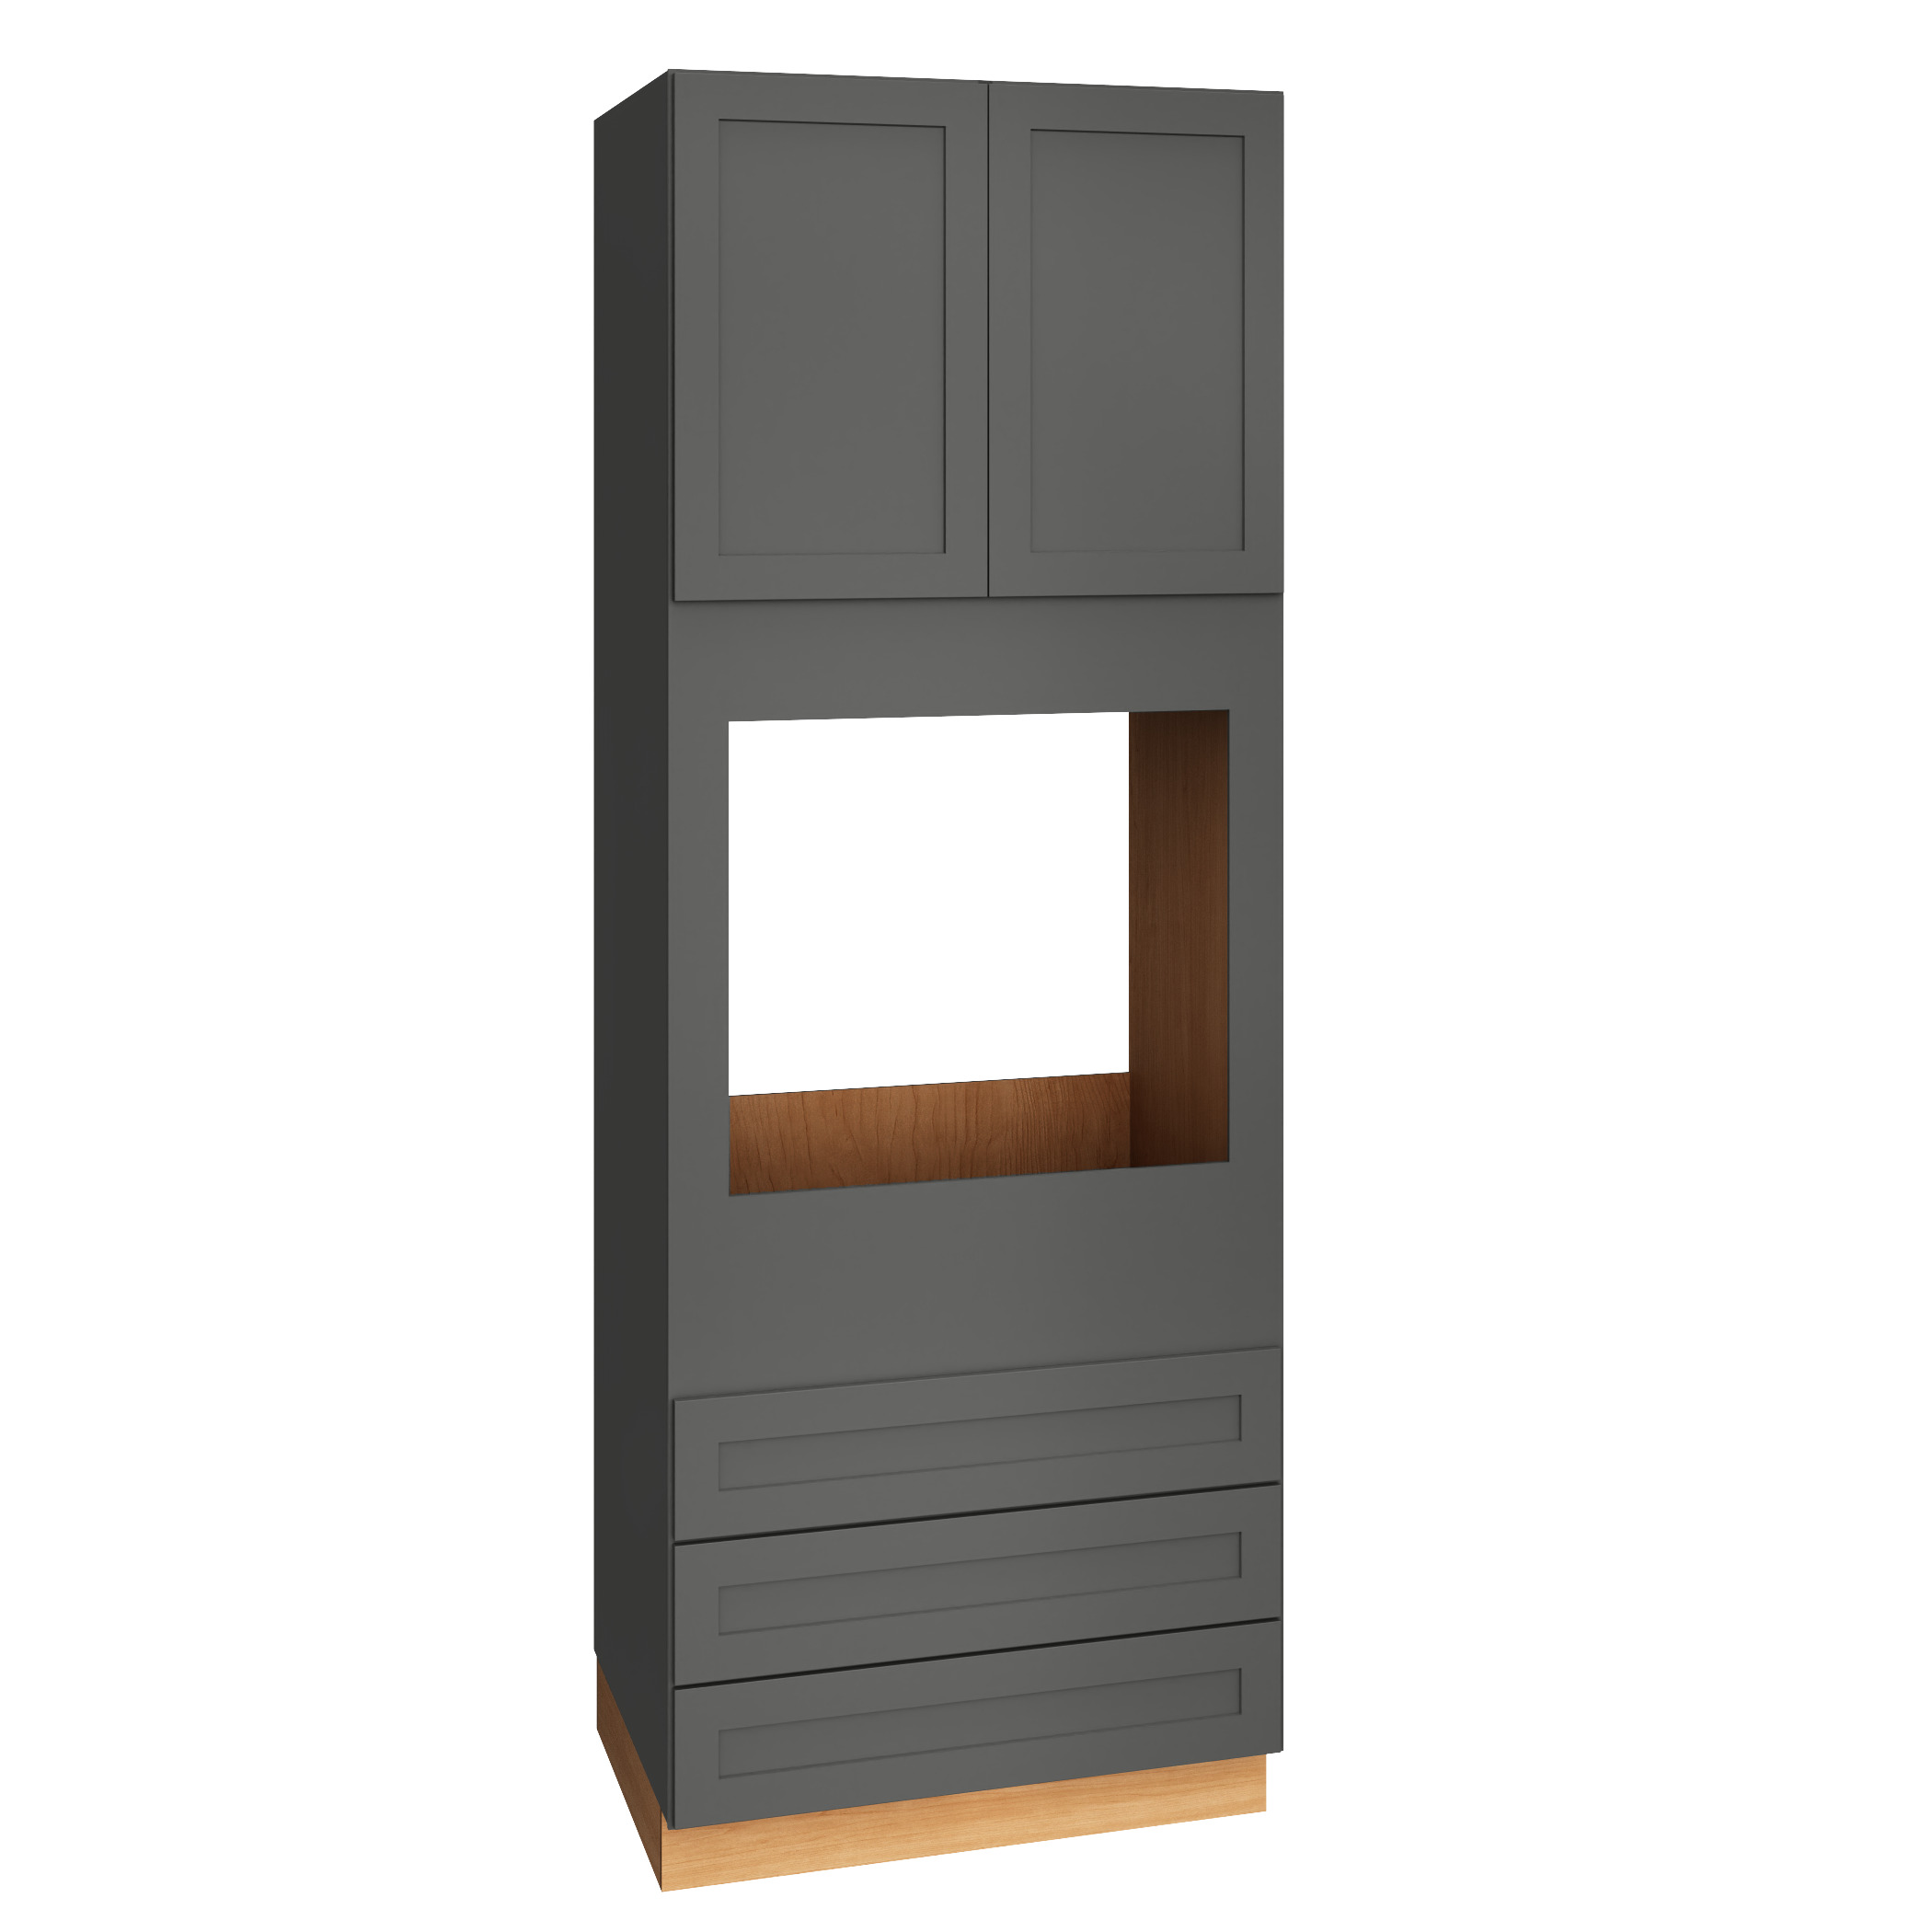 Single Oven Cabinet With Drawers in Graphite